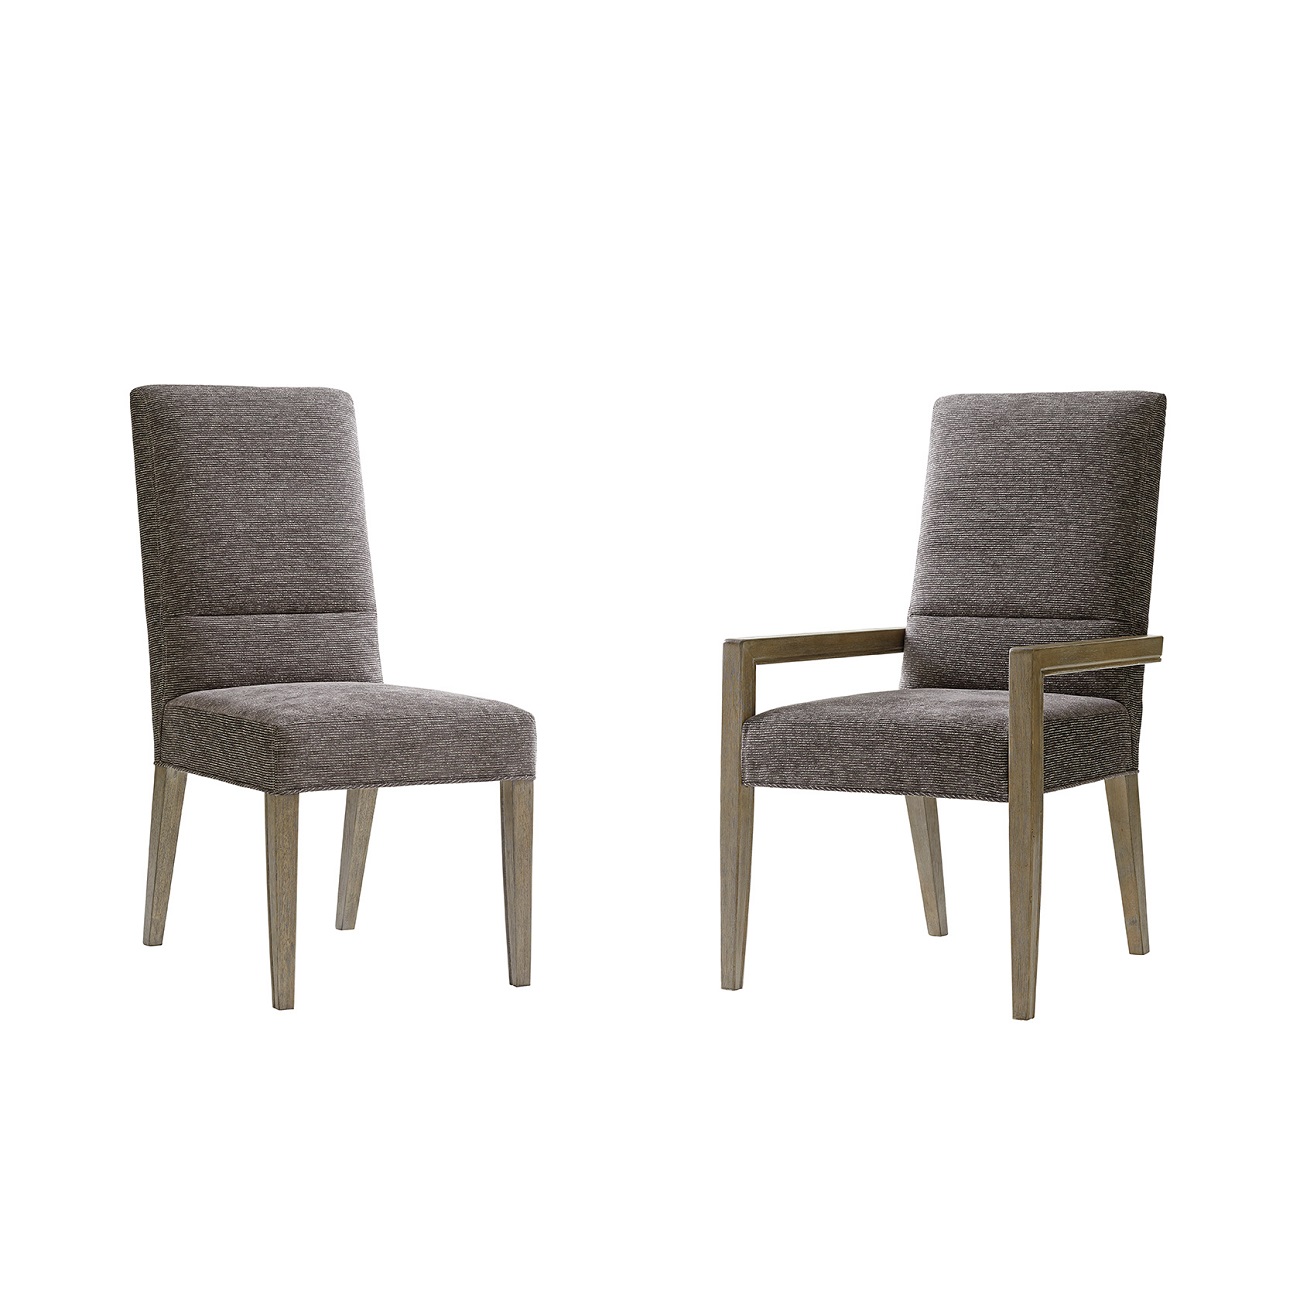 Shadow Play Metro Dining Chair, Upholstery fabric Dining Chairs For Sale 